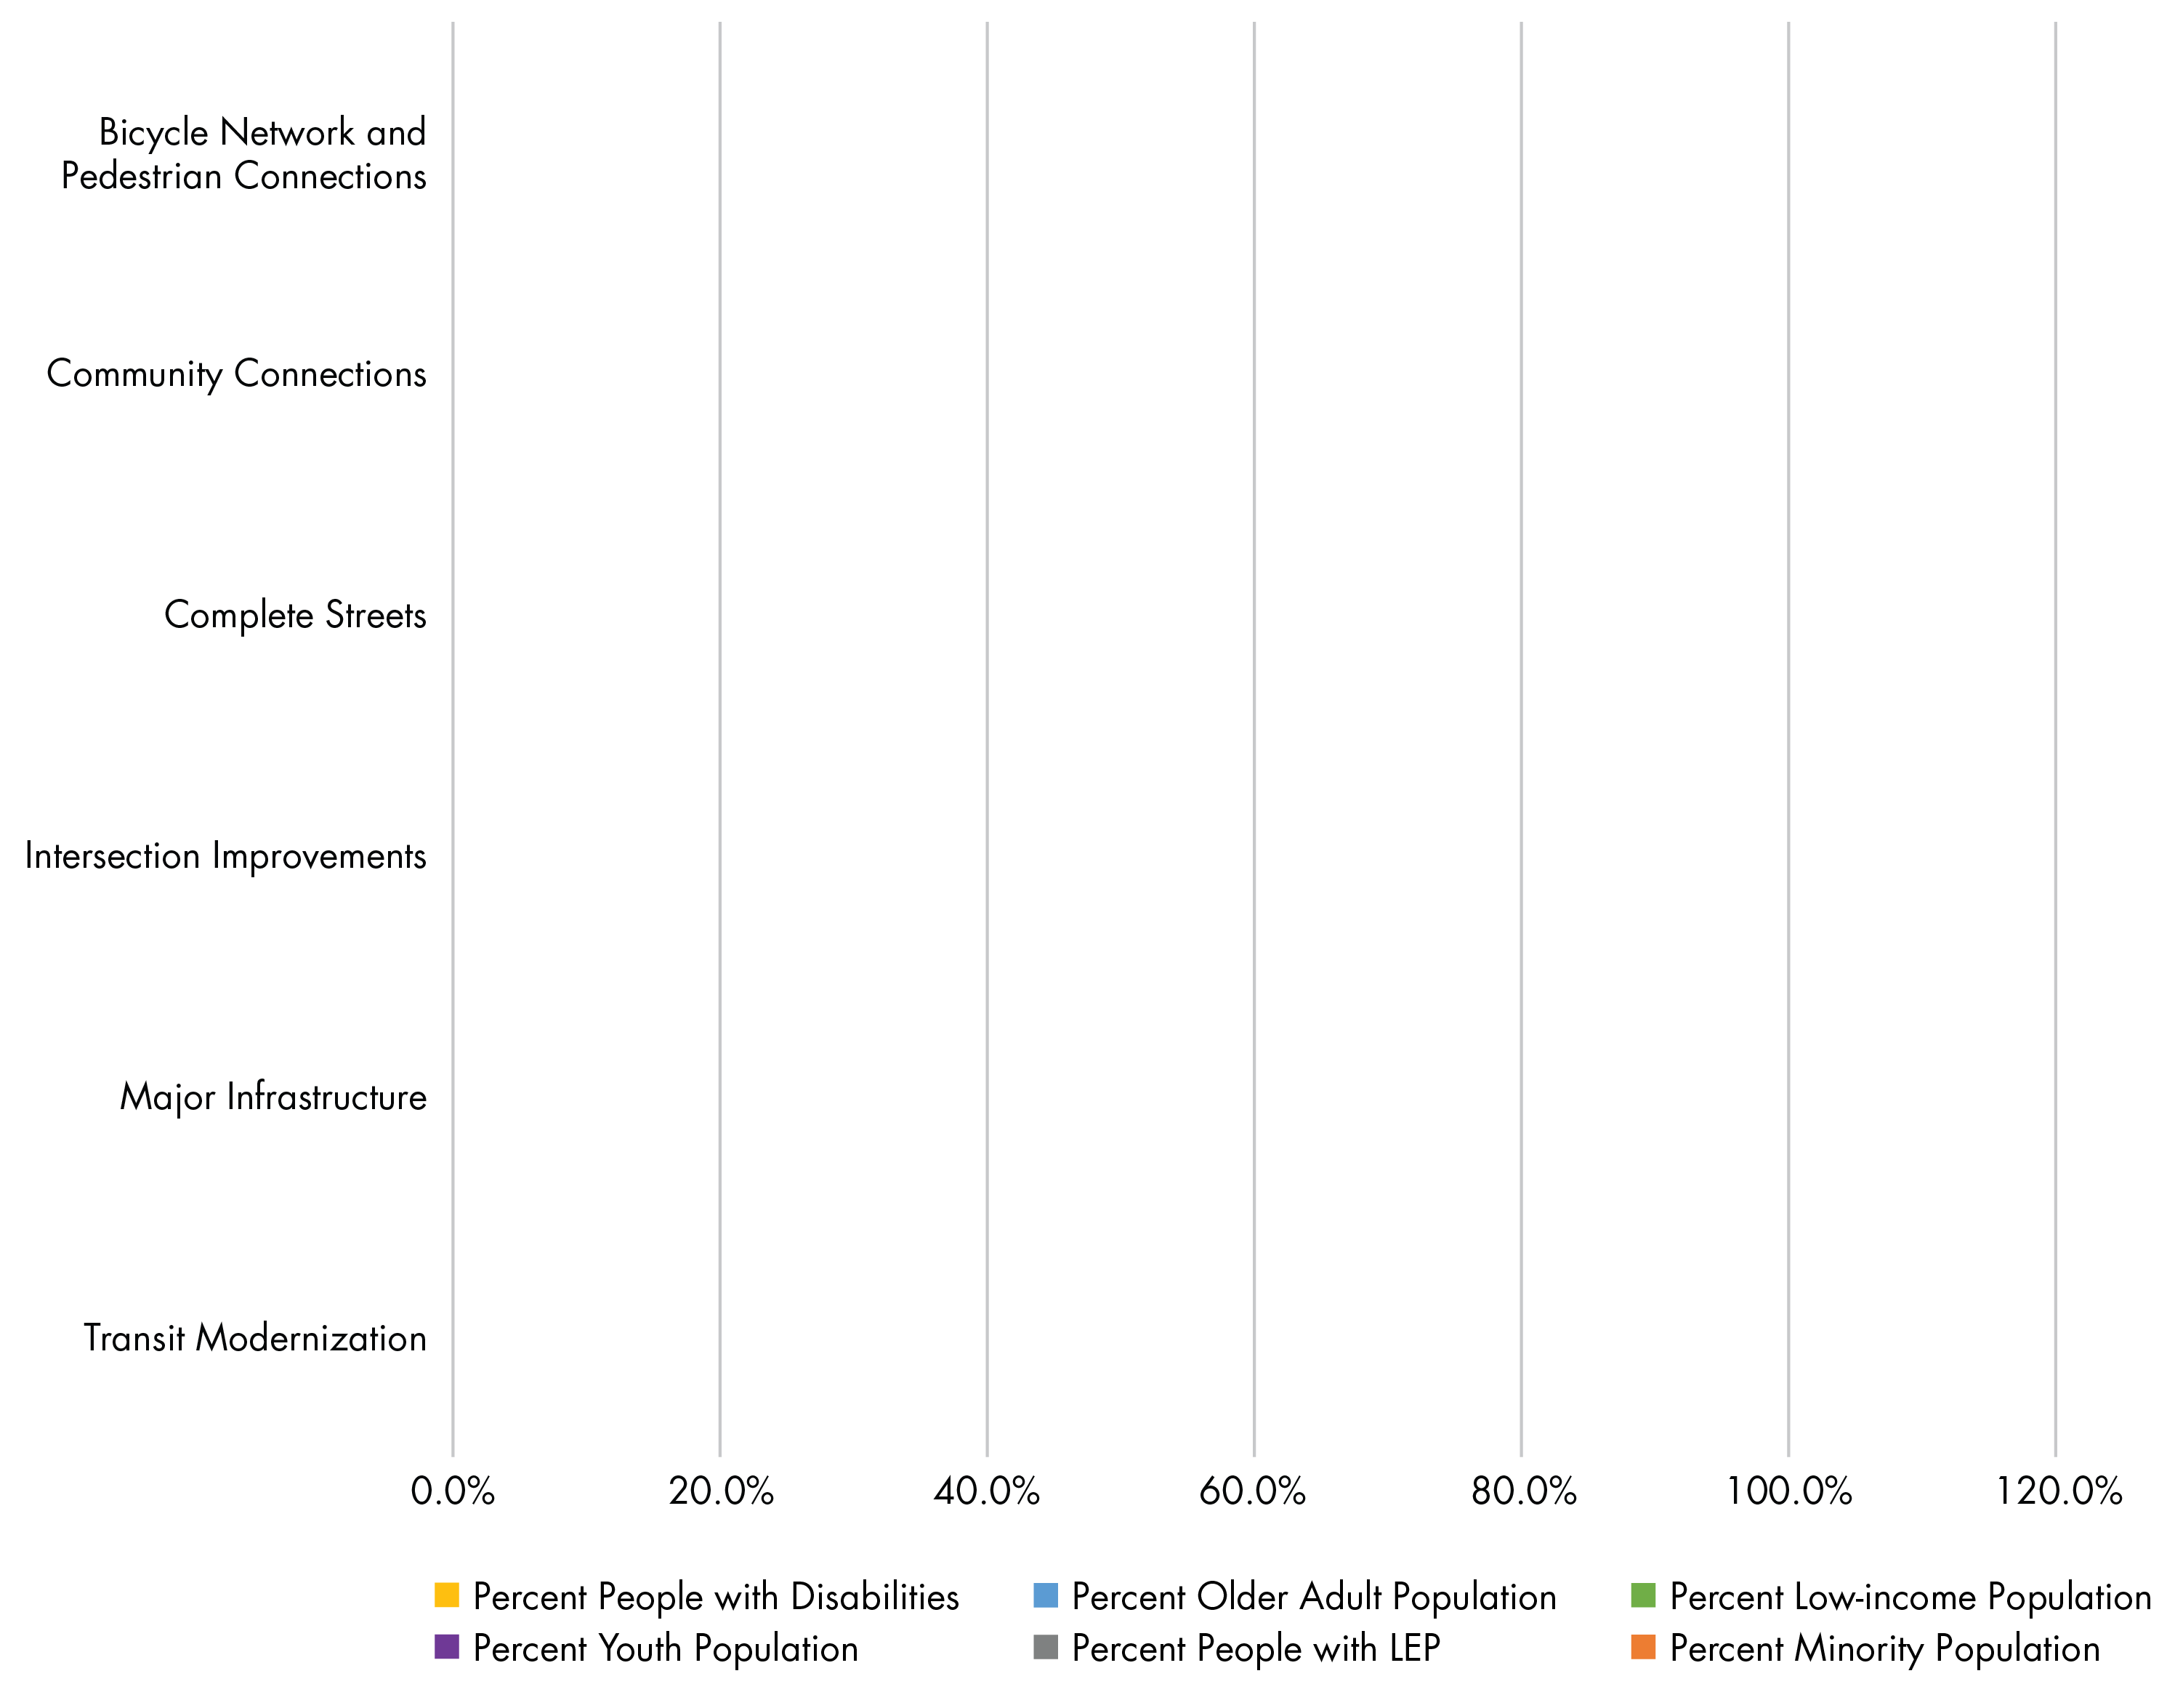 Figure 6-9 shows the share of each TE population served or impacts by Regional Target-funded projects within each investment program. This figure will be updated for the public review draft of the TIP when the necessary information is available to complete the required analysis.